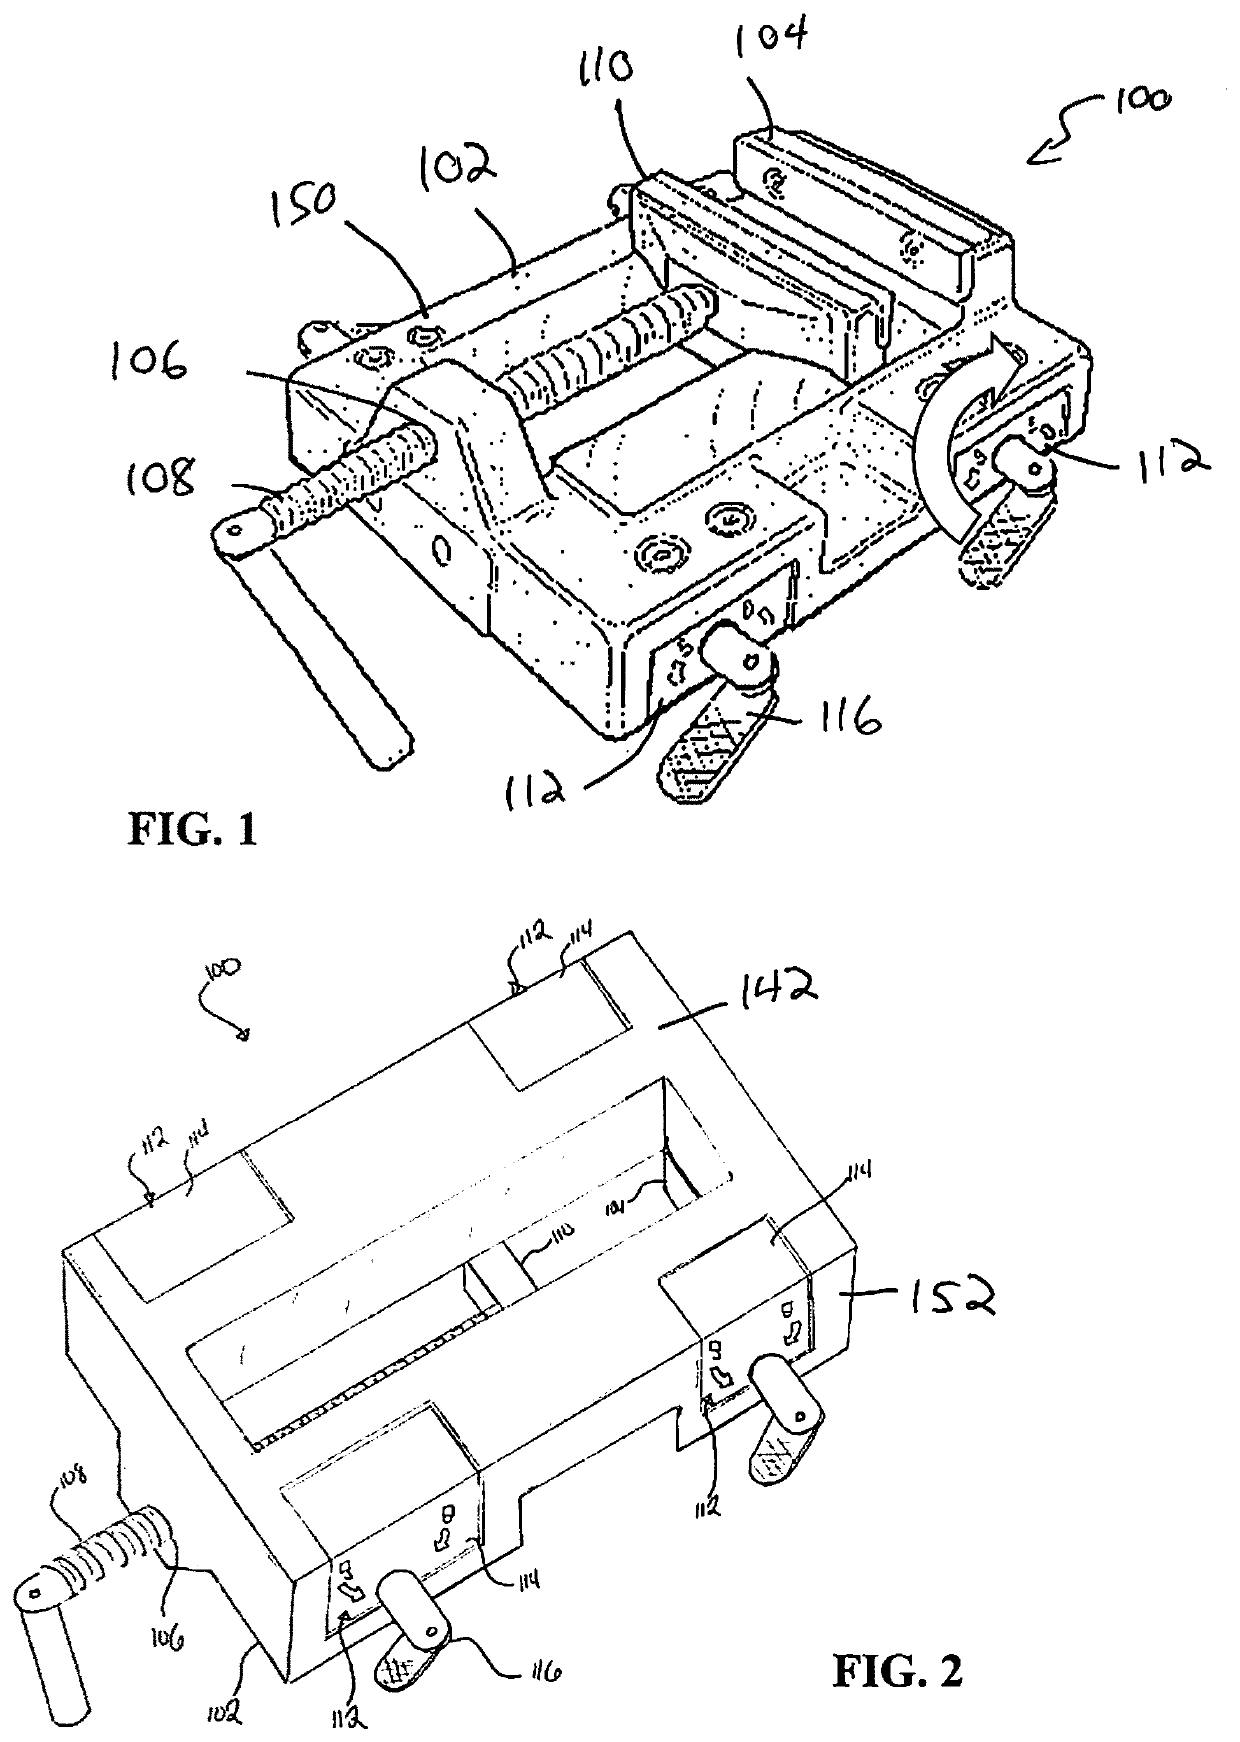 Vise with magnet